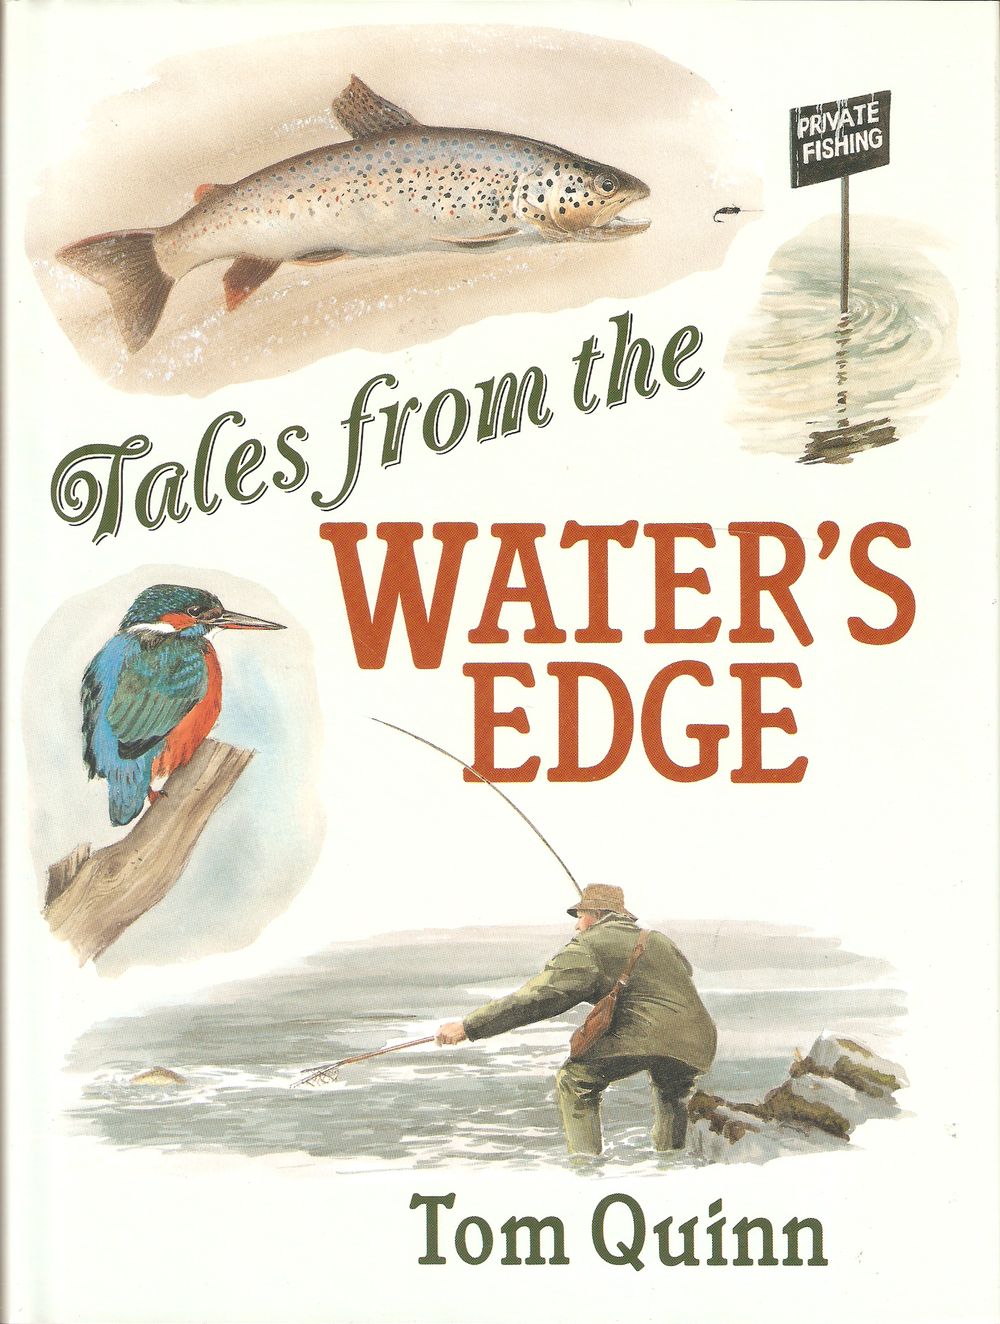 TALES FROM THE WATER'S EDGE. By Tom Quinn. - Quinn (Tom).